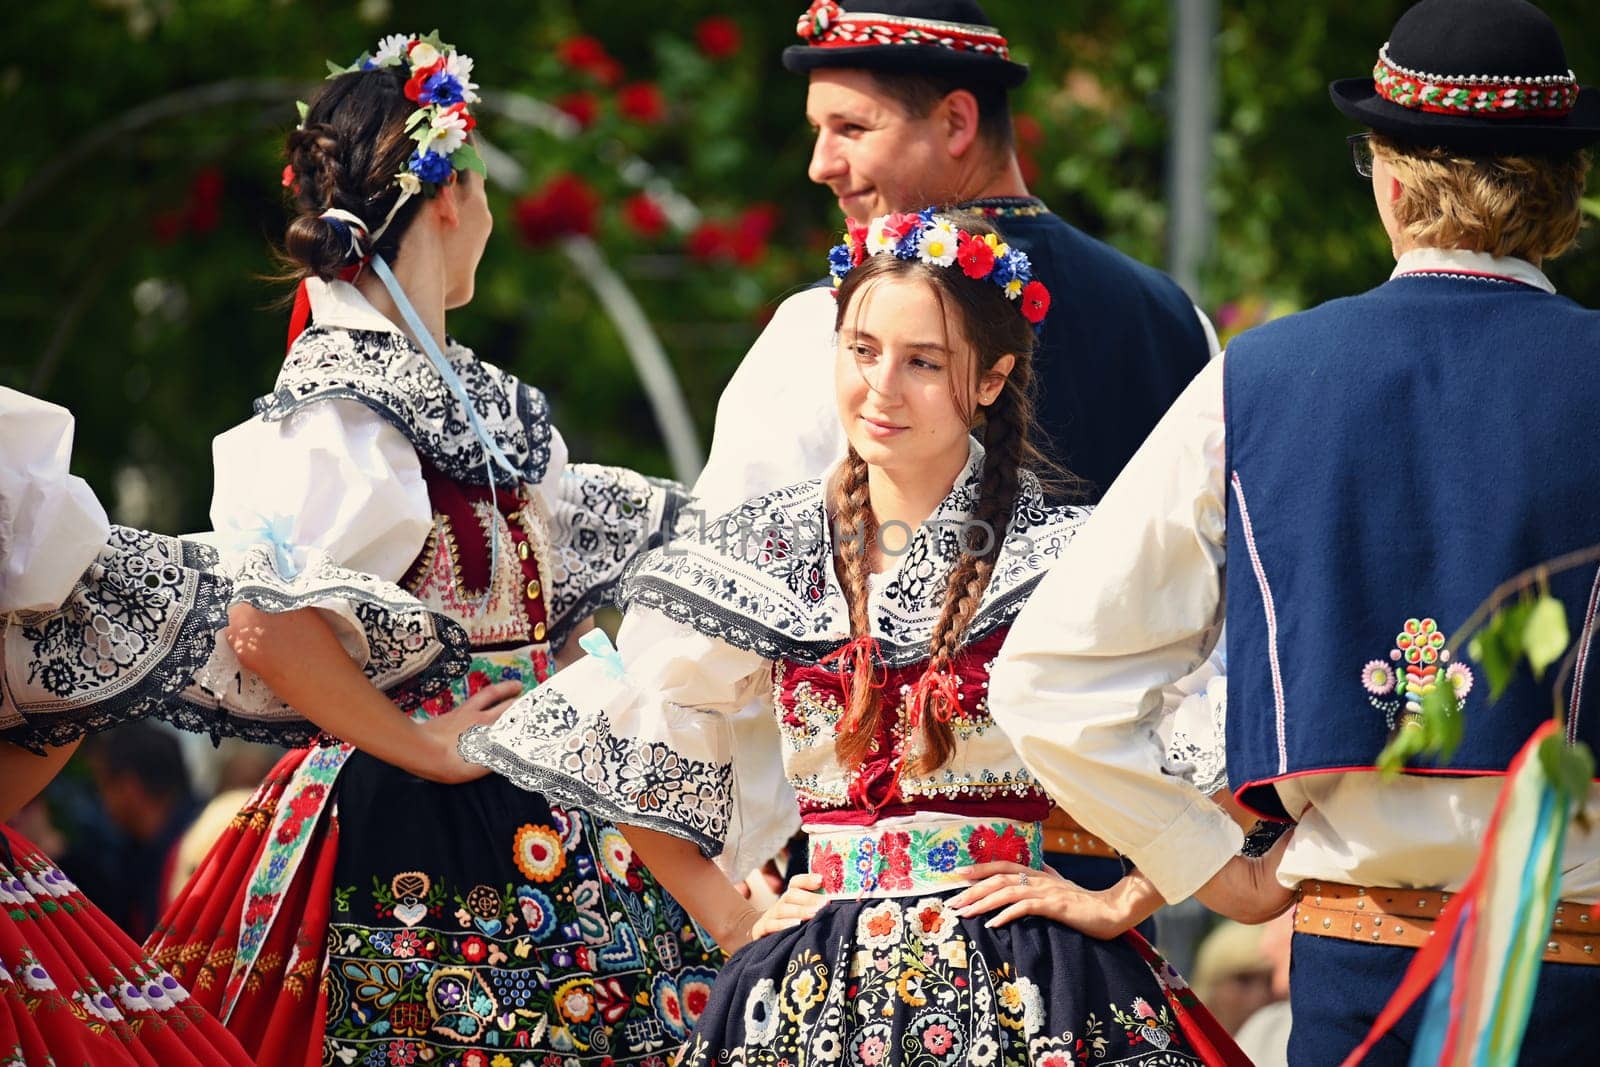 Brno - Bystrc, Czech Republic, 24 June, 2023. Traditional festivities of the feast of the feast in the Czech Republic. Food and drink festival. Girls and boys dancing in beautiful colourful traditional costumes. An old Czech custom of celebrating in villages.  by Montypeter